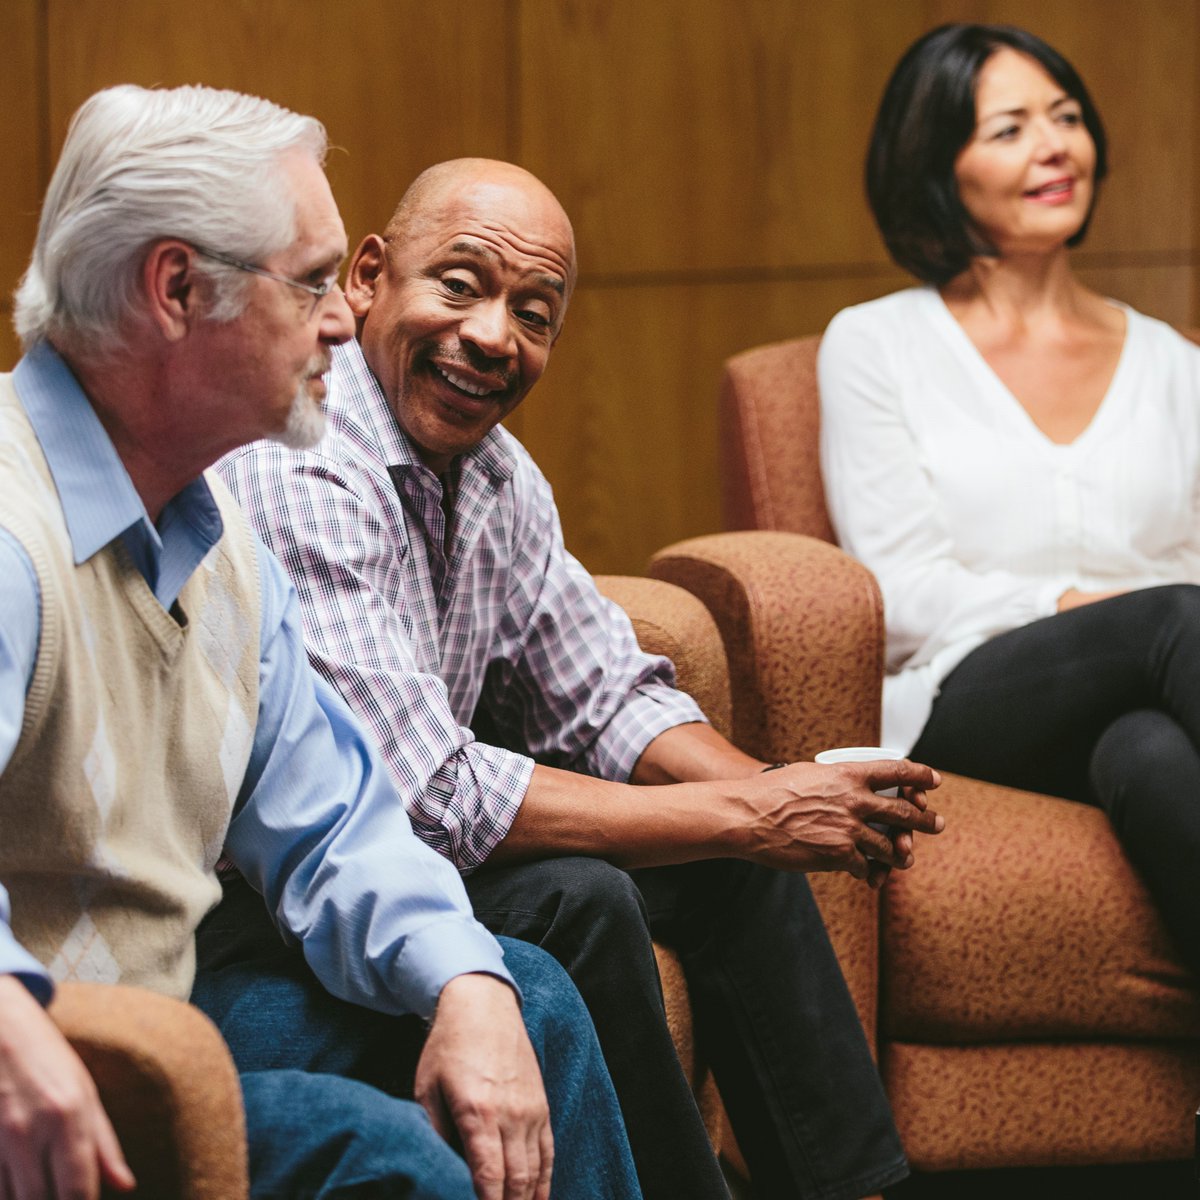 Our support groups provide a safe, confidential and supportive environment where people can connect. Find a support group near you: bit.ly/3tJ4nU9.